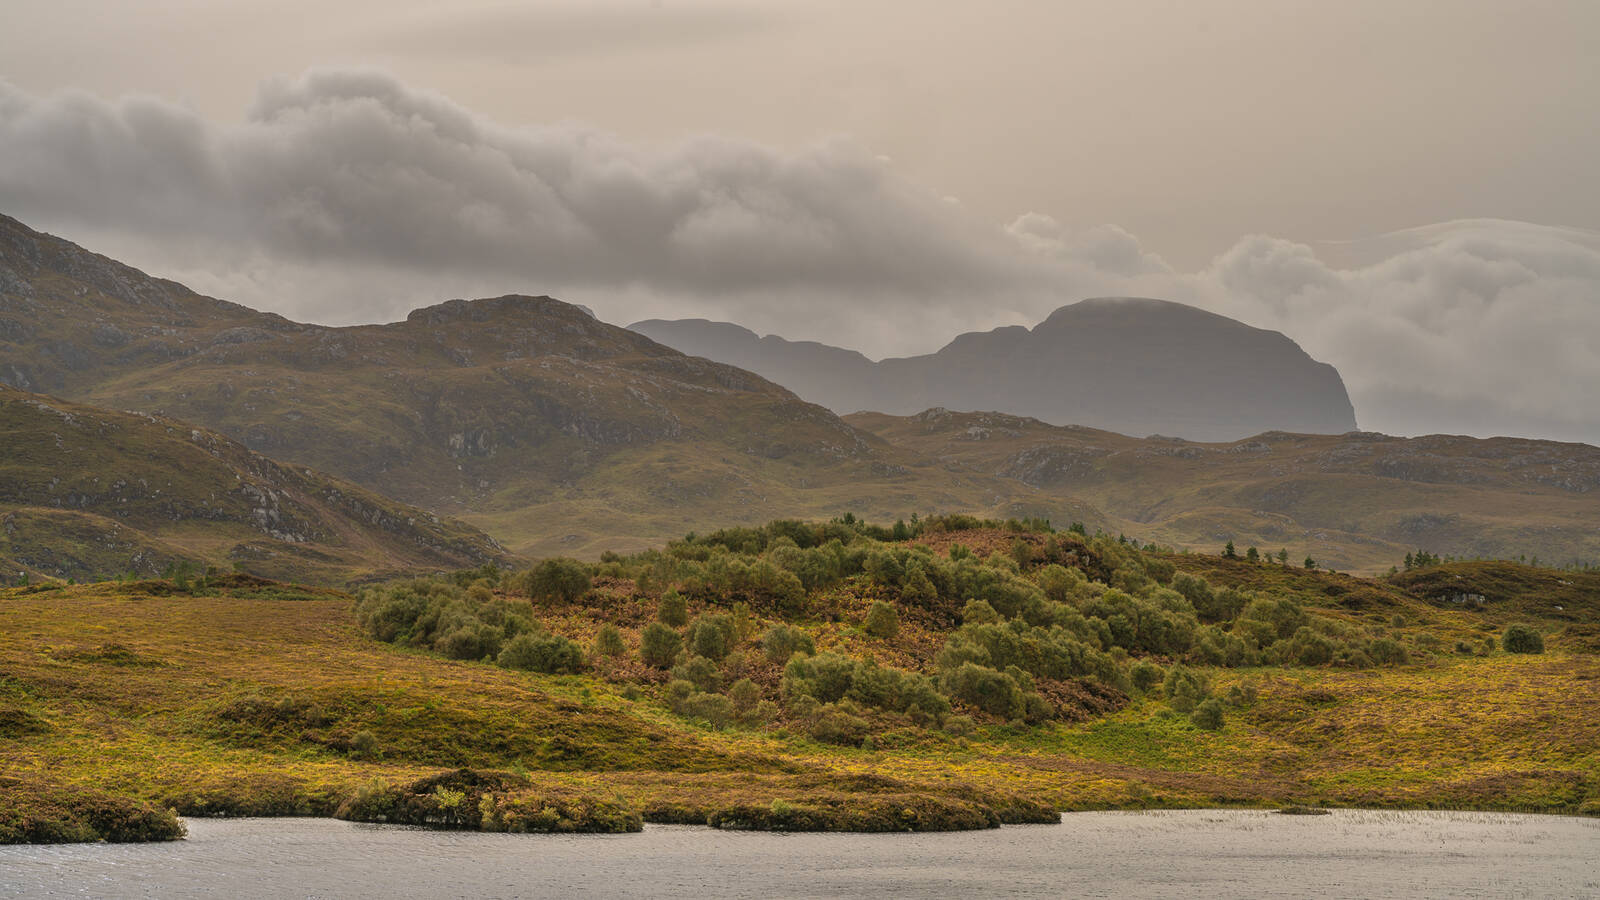 Image of Assynt all-abilities walk by James Billings.